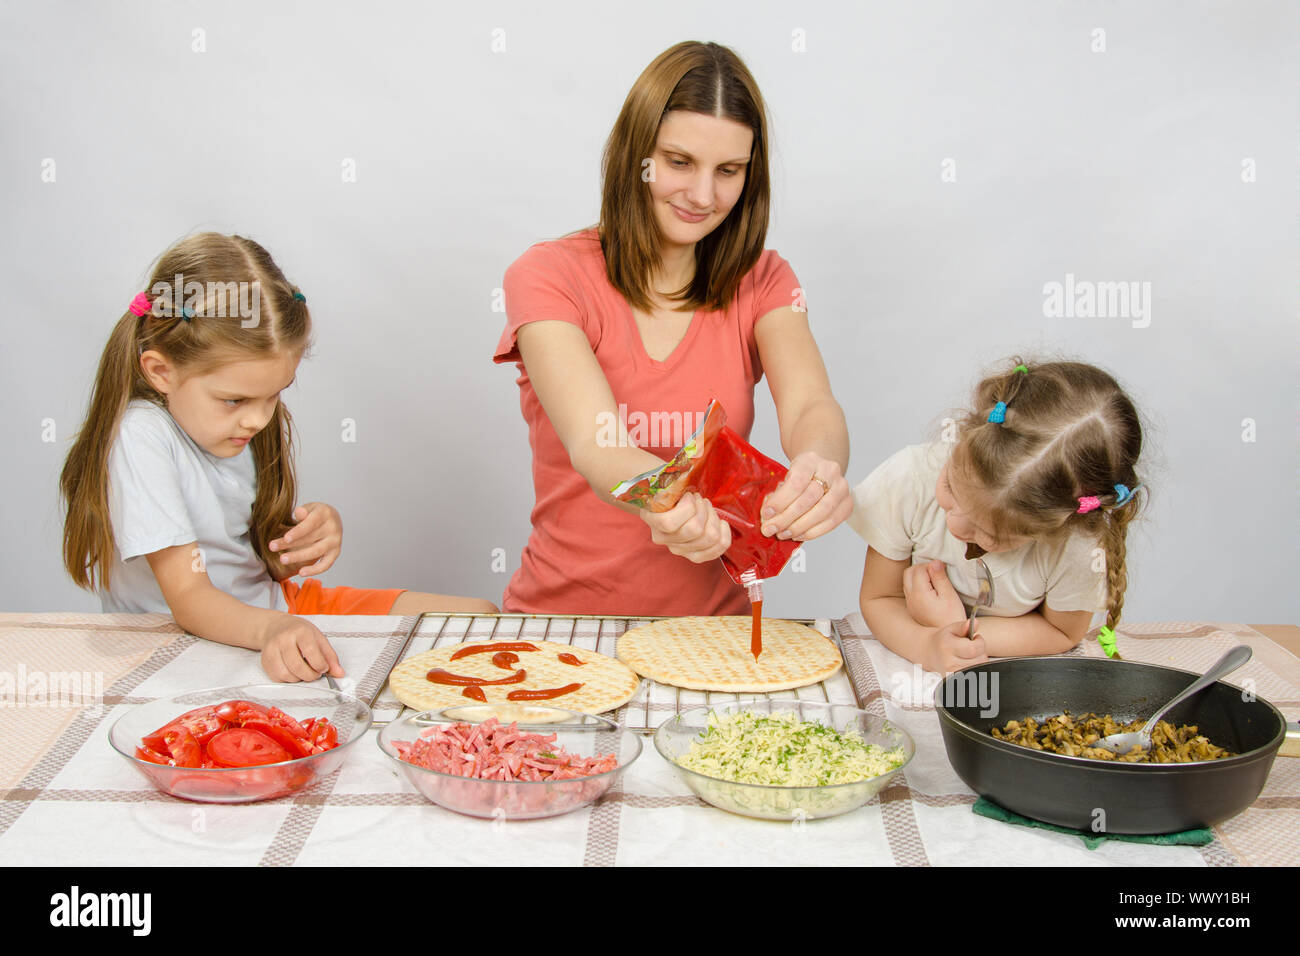 Two little girls enthusiastically watched as mum pours ketchup basis for pizza Stock Photo